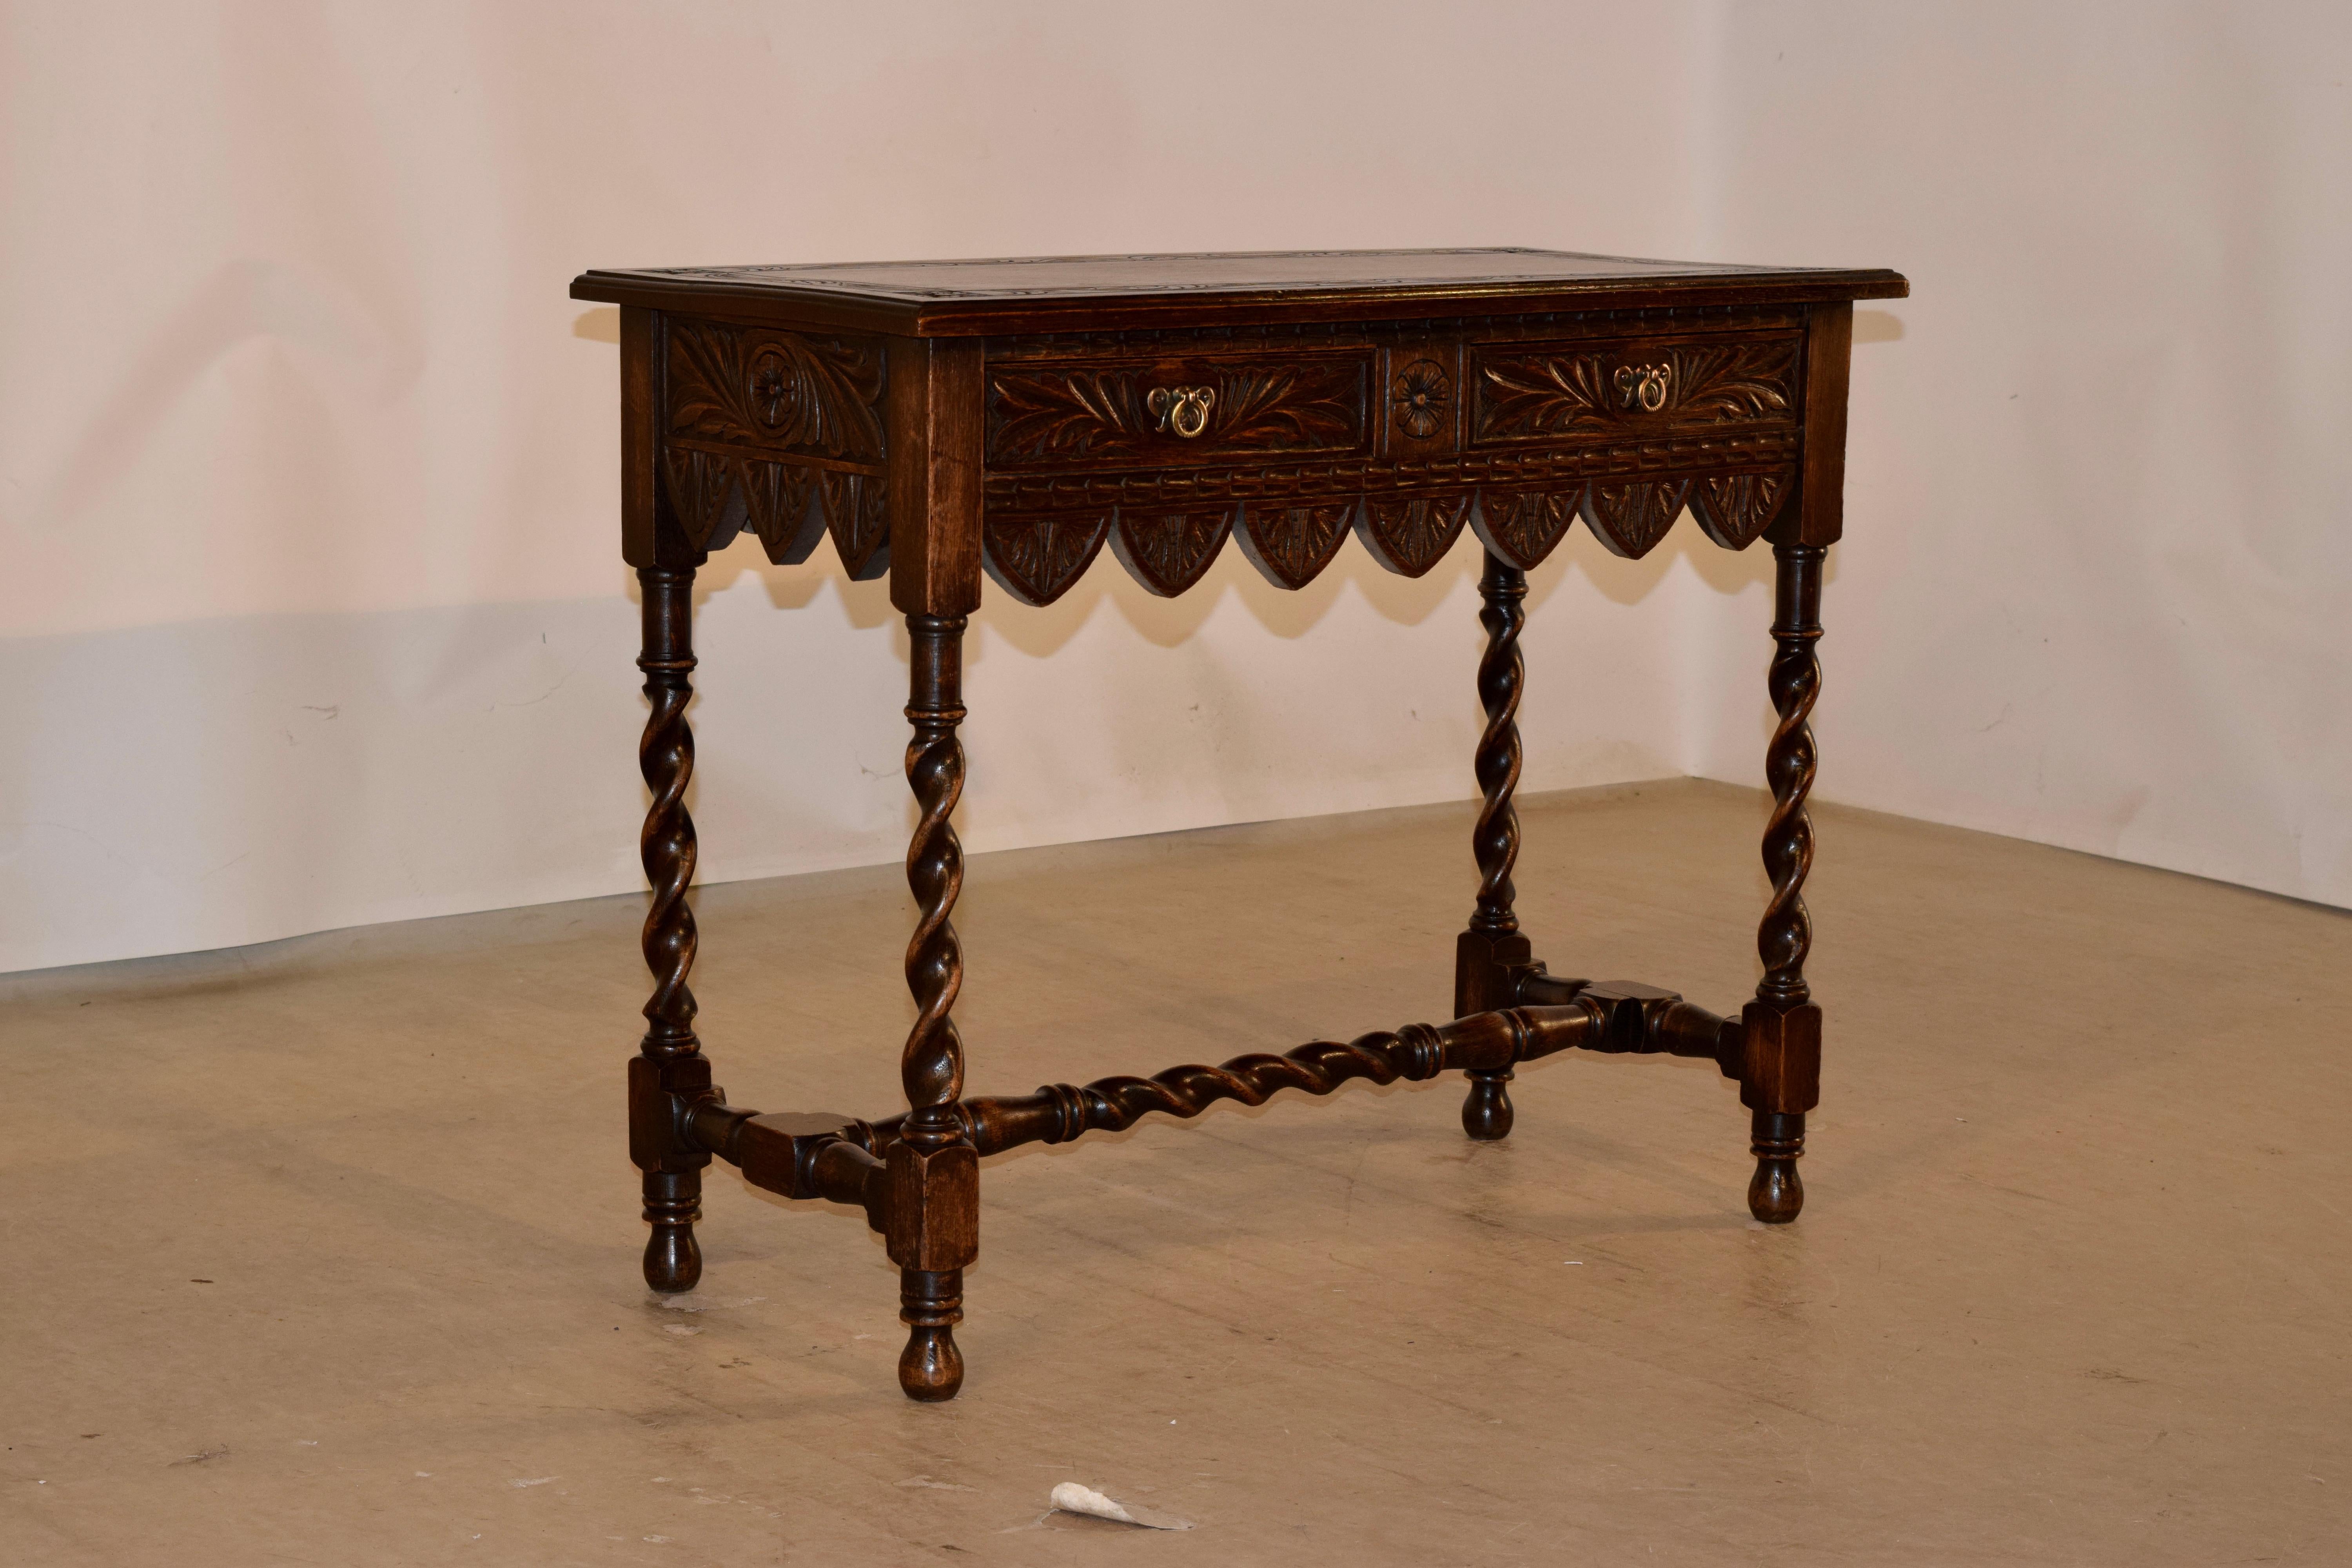 19th century oak console table from England with a beveled edge around the top and a central carved band with acanthus leaf decoration. The apron is hand carved decorated on all four sides for easy placement in any room, and terminates in a